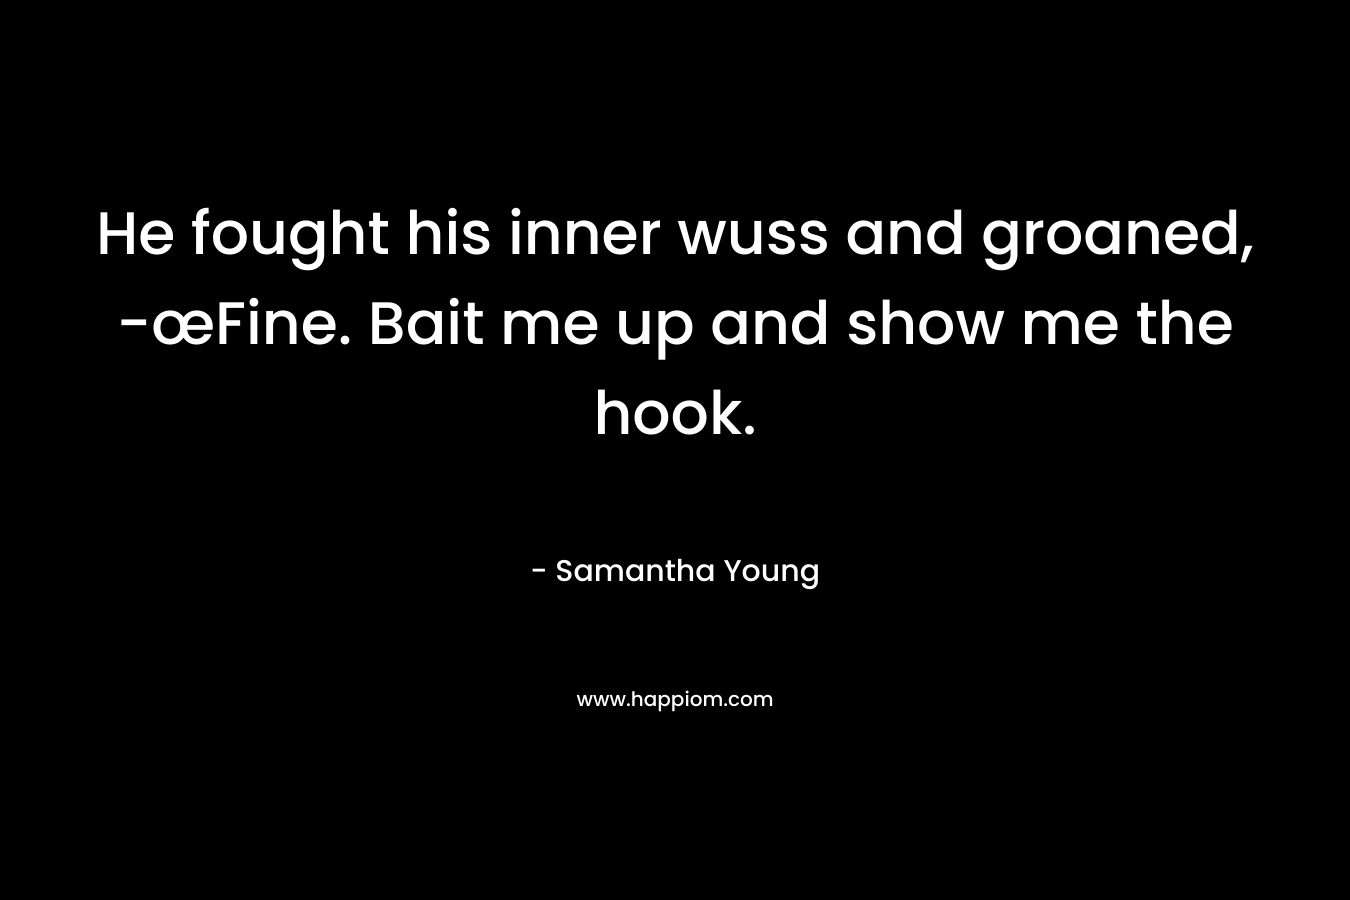 He fought his inner wuss and groaned, -œFine. Bait me up and show me the hook. – Samantha Young